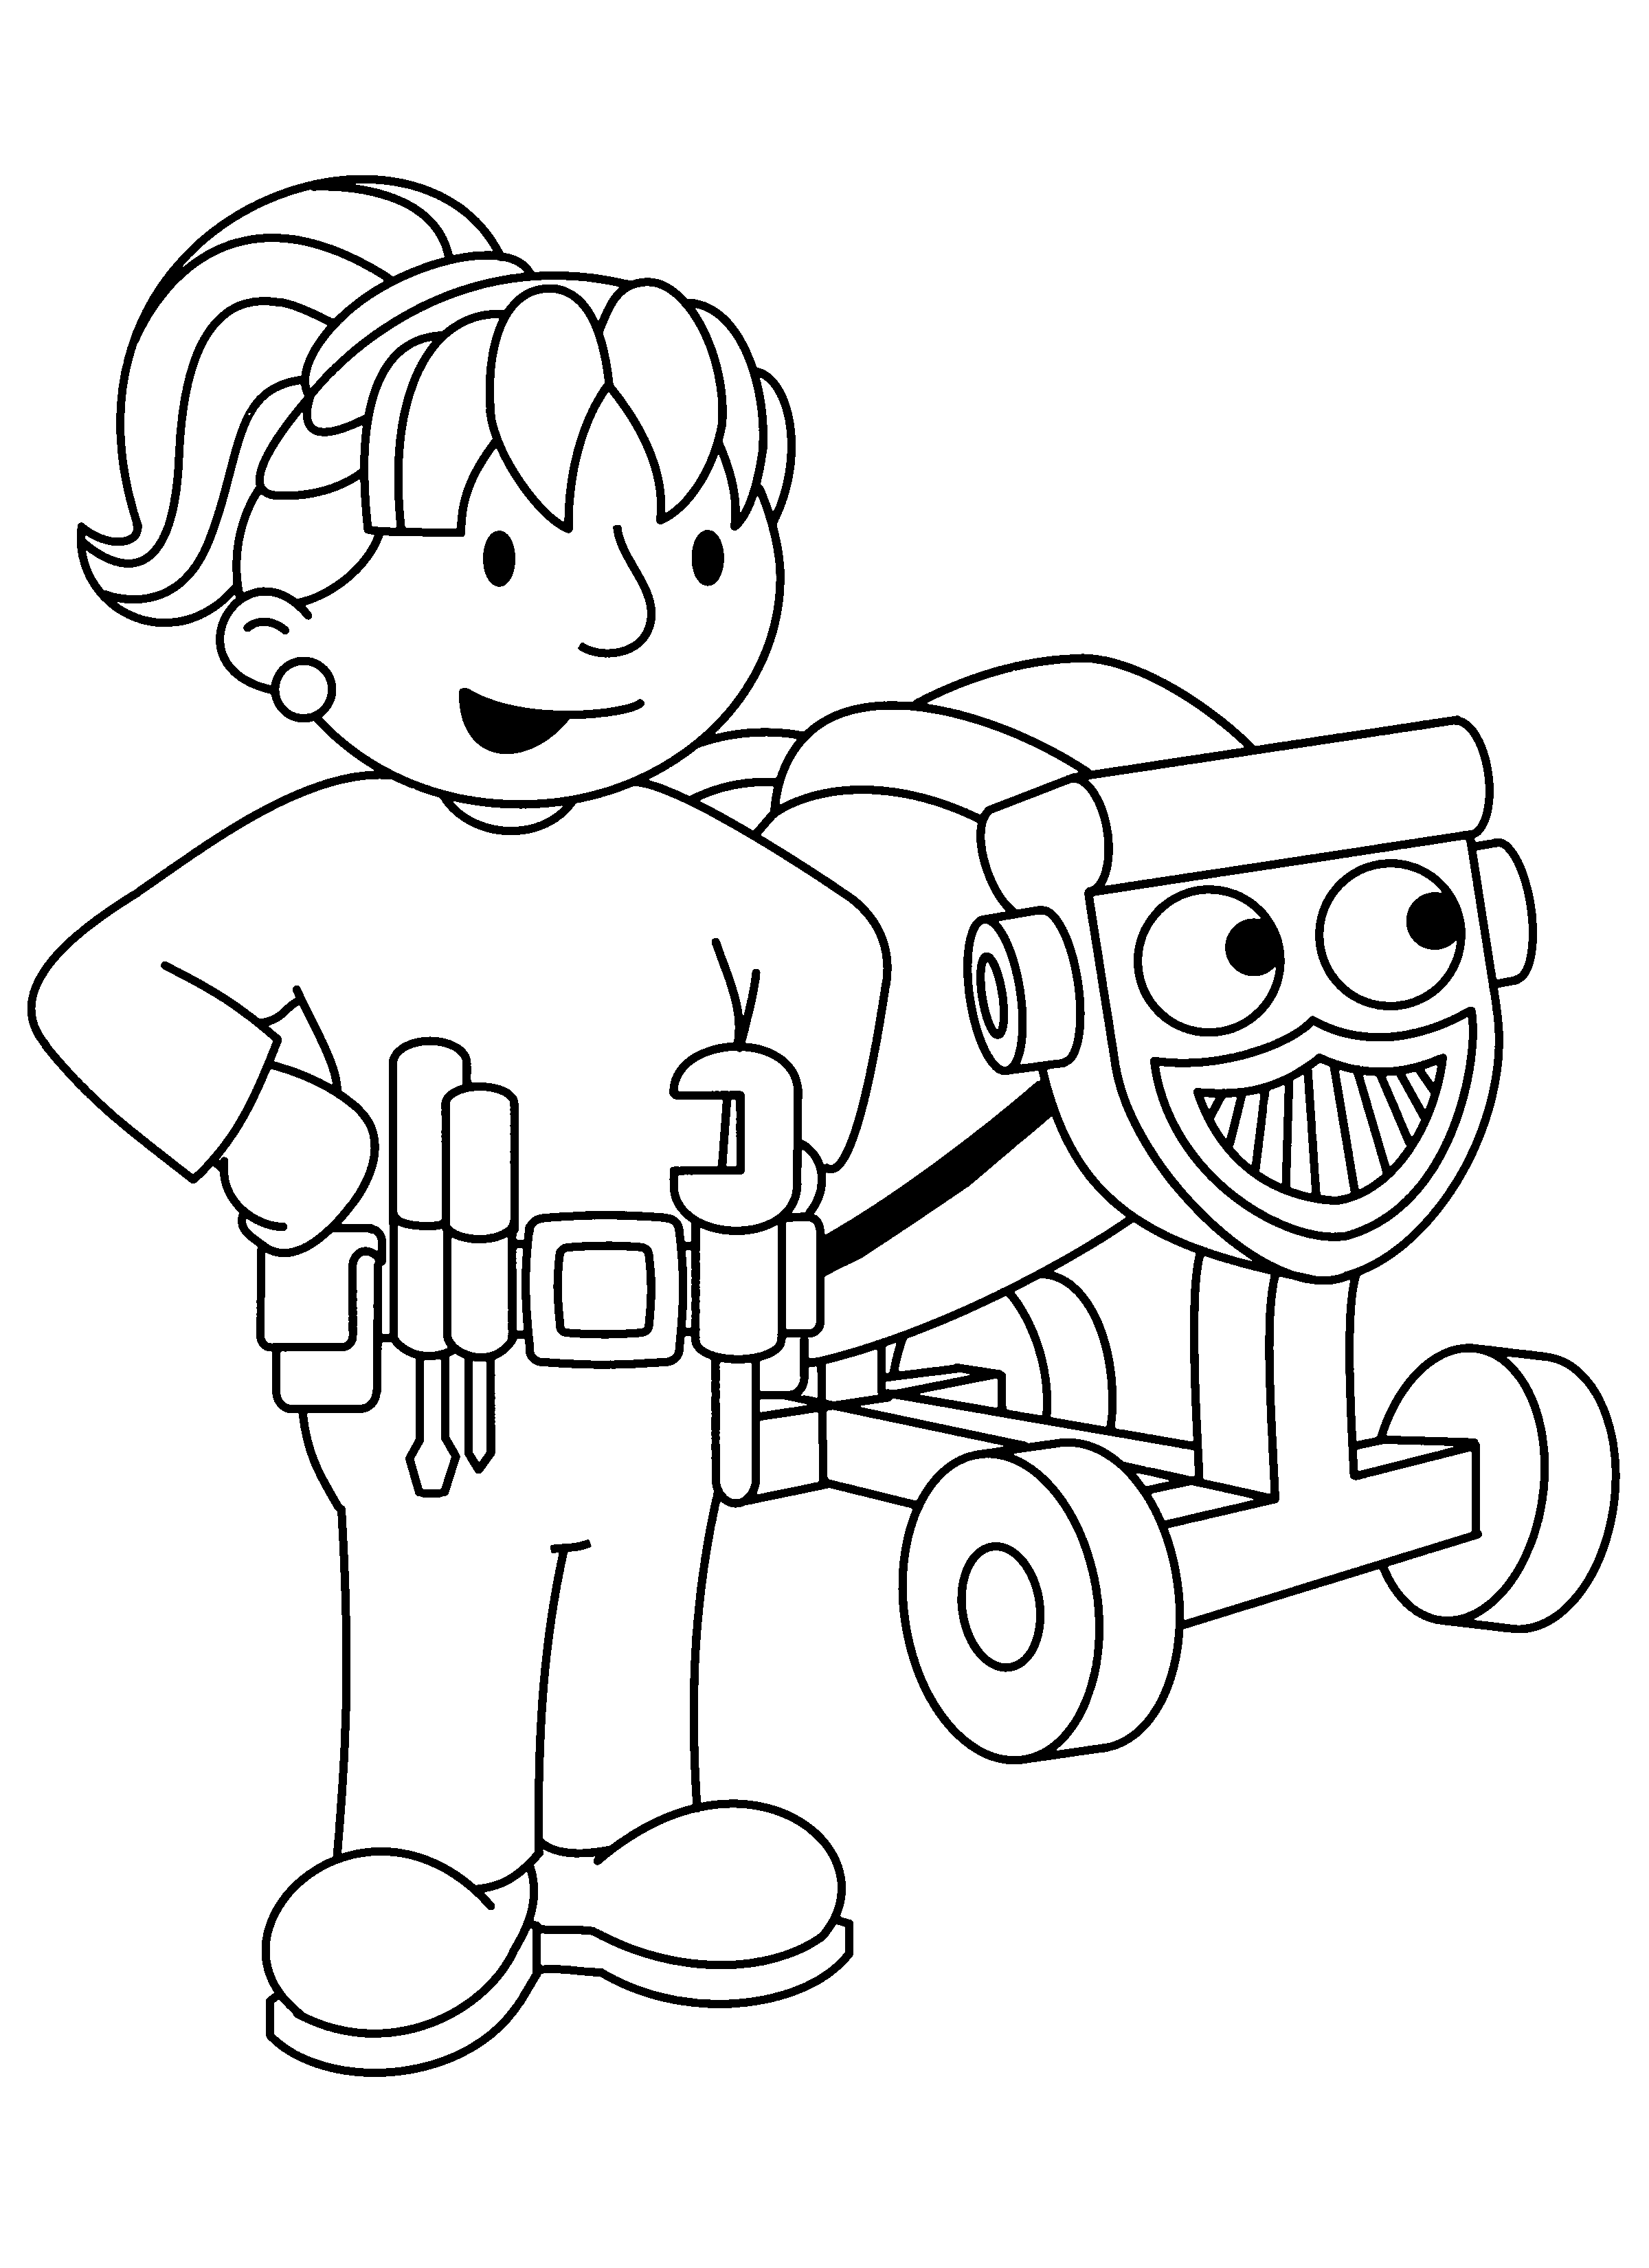 Bob The Builder Coloring Sheet Coloring Pages